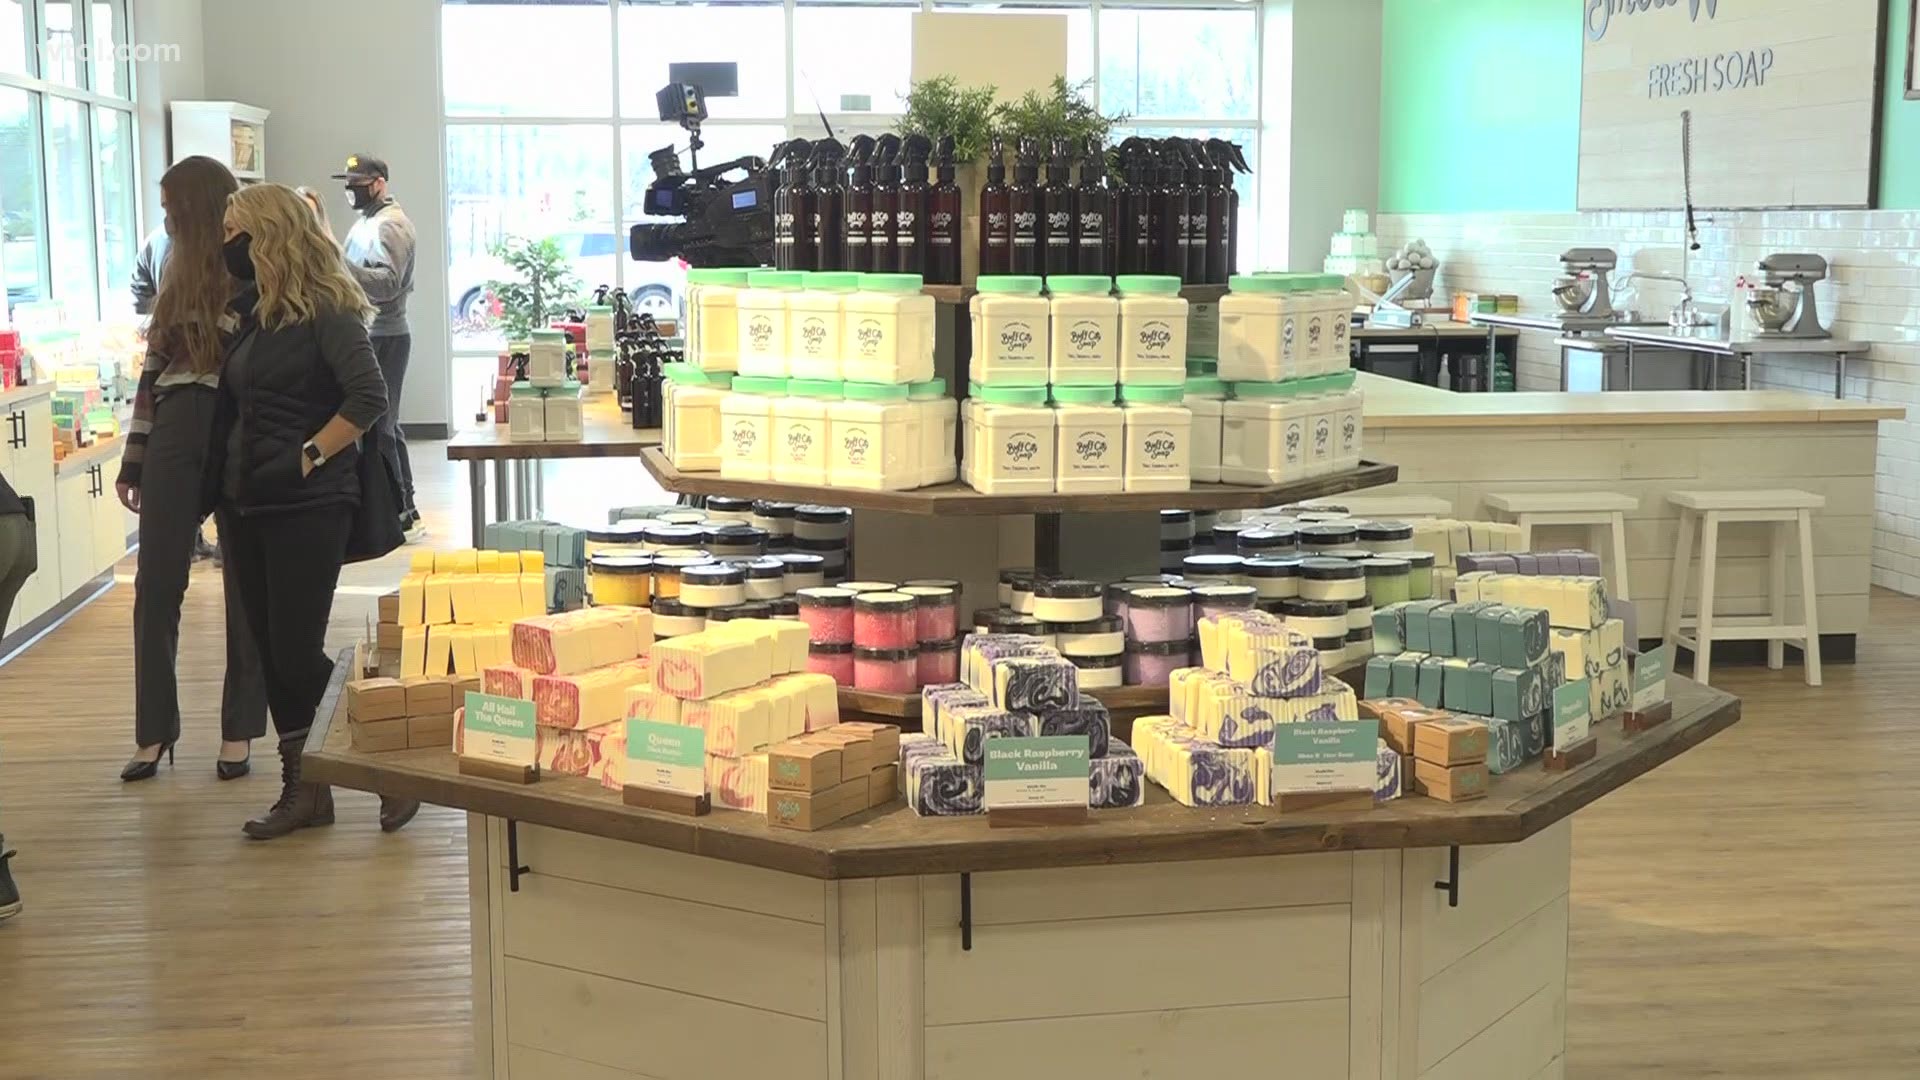 The grand opening of Buff City Soap at the new Secor Rd. location will feature free soap for a year to the first 50 people through the door.